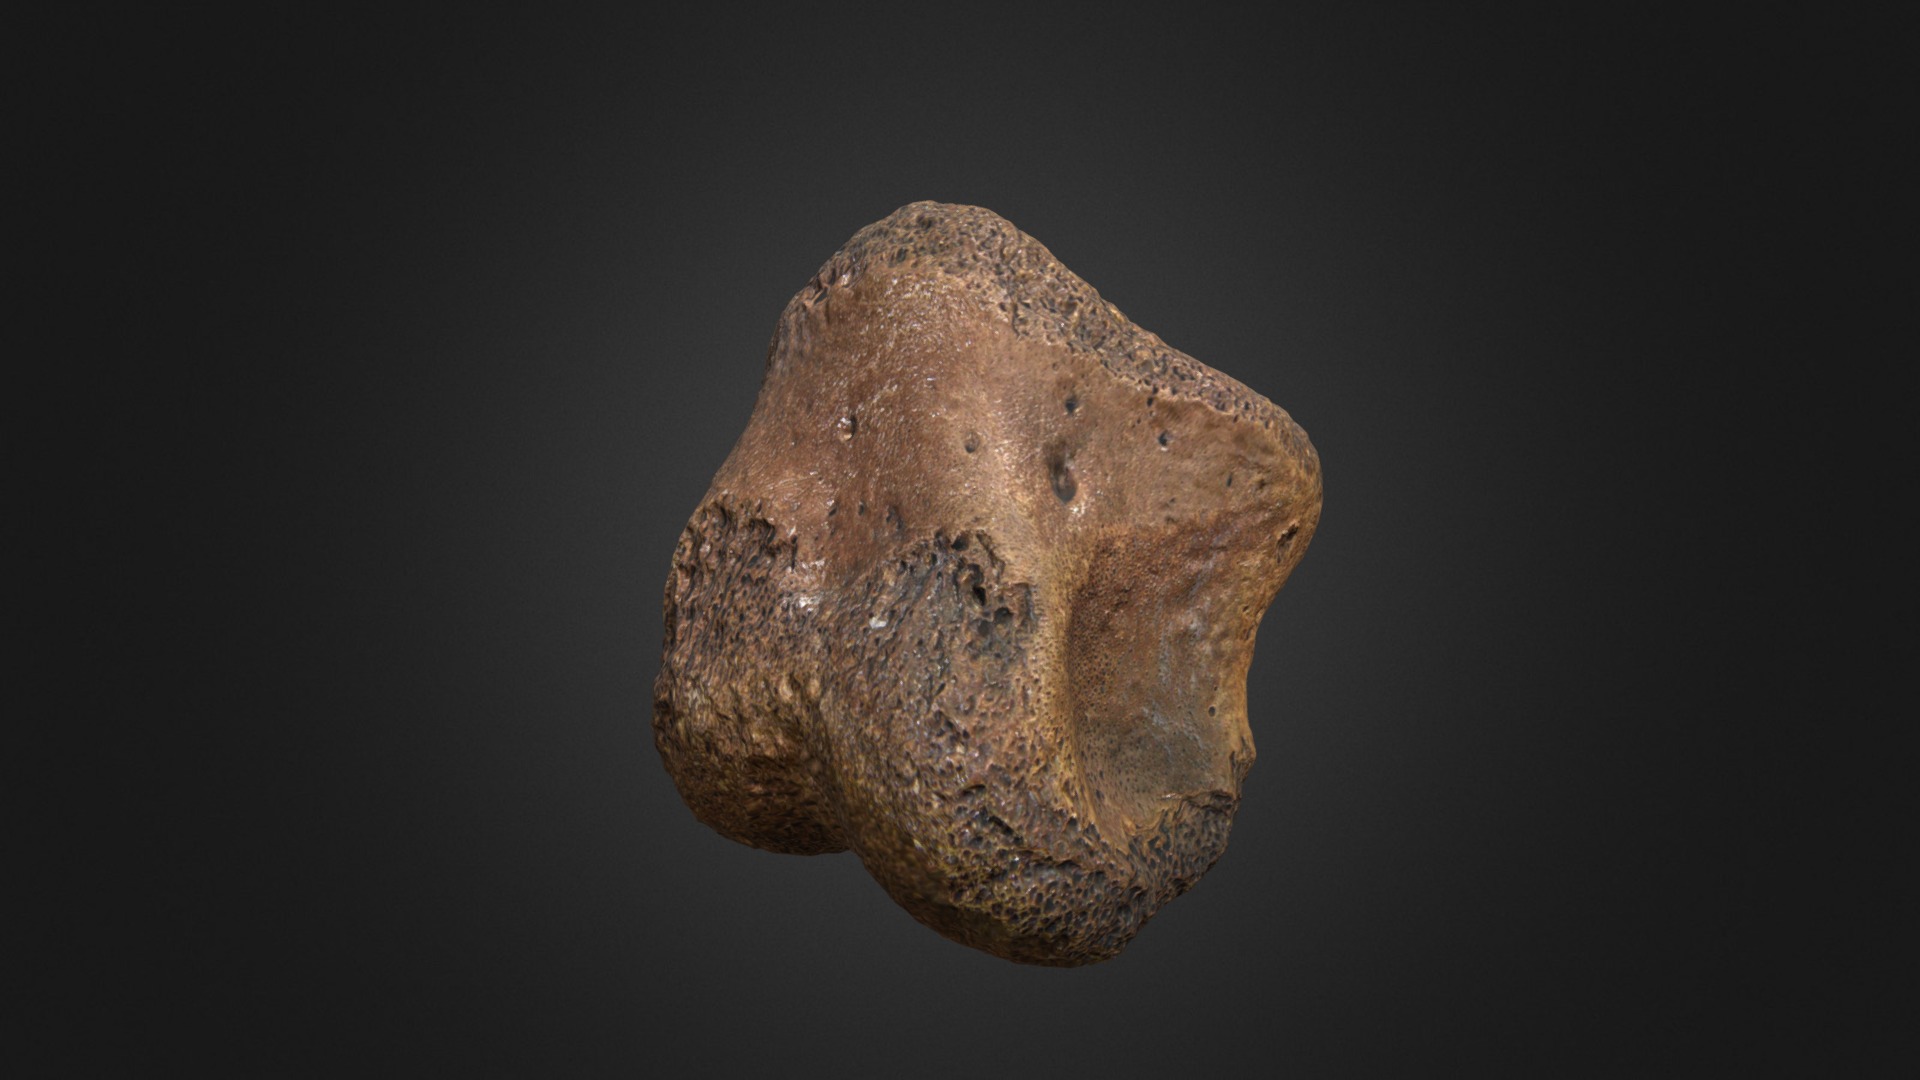 3D model Thescelosaurus Toe Bone - This is a 3D model of the Thescelosaurus Toe Bone. The 3D model is about a stone with a dark background.